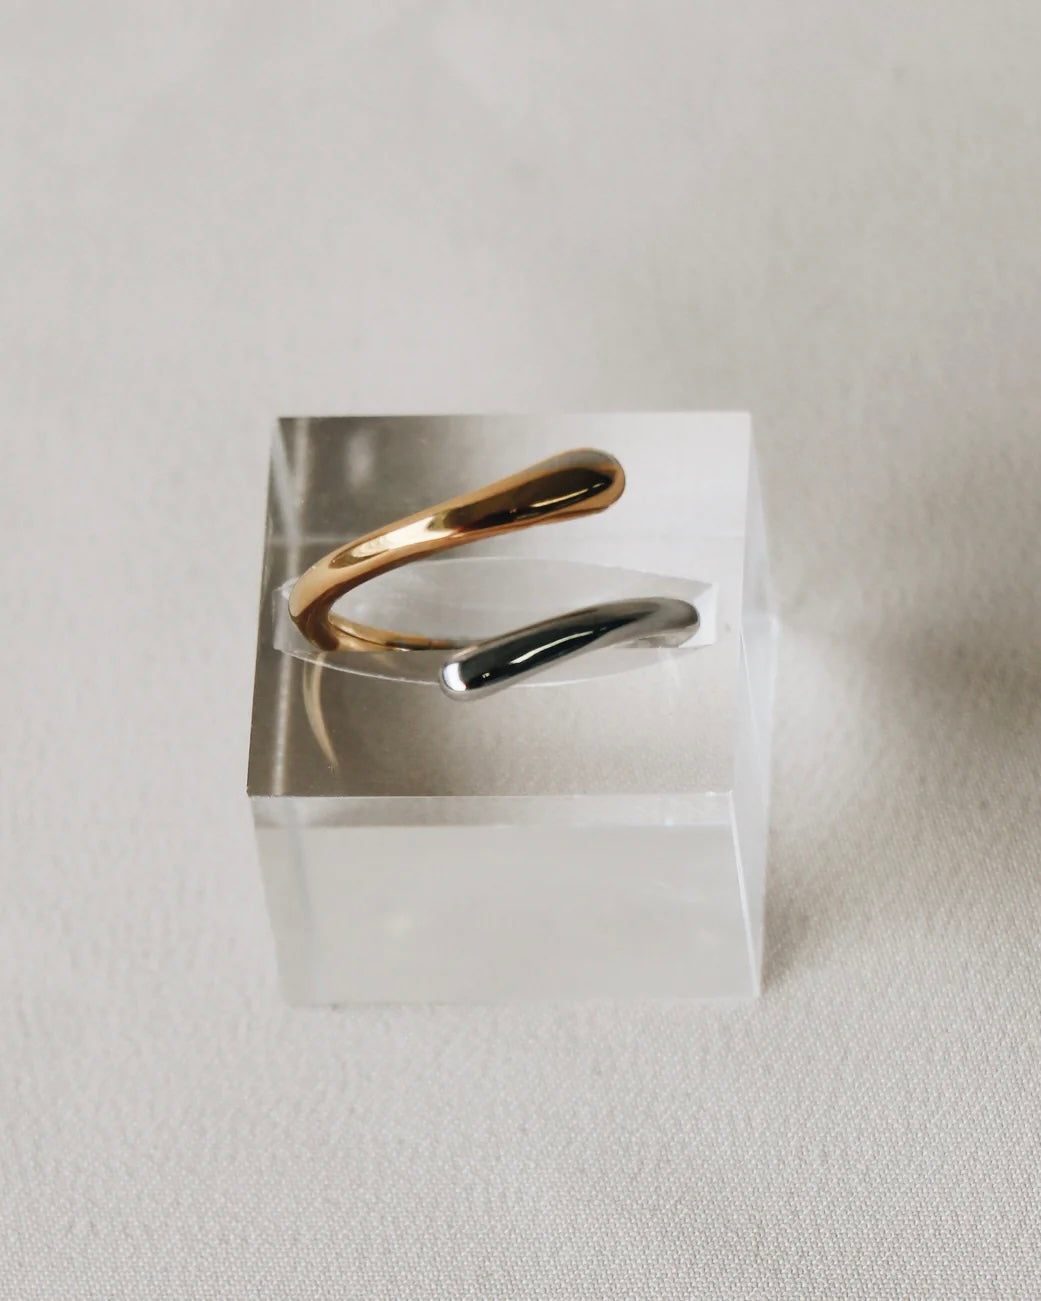 the Horace Dobli Ring in gold and silver sitting in a plexiglass display cube